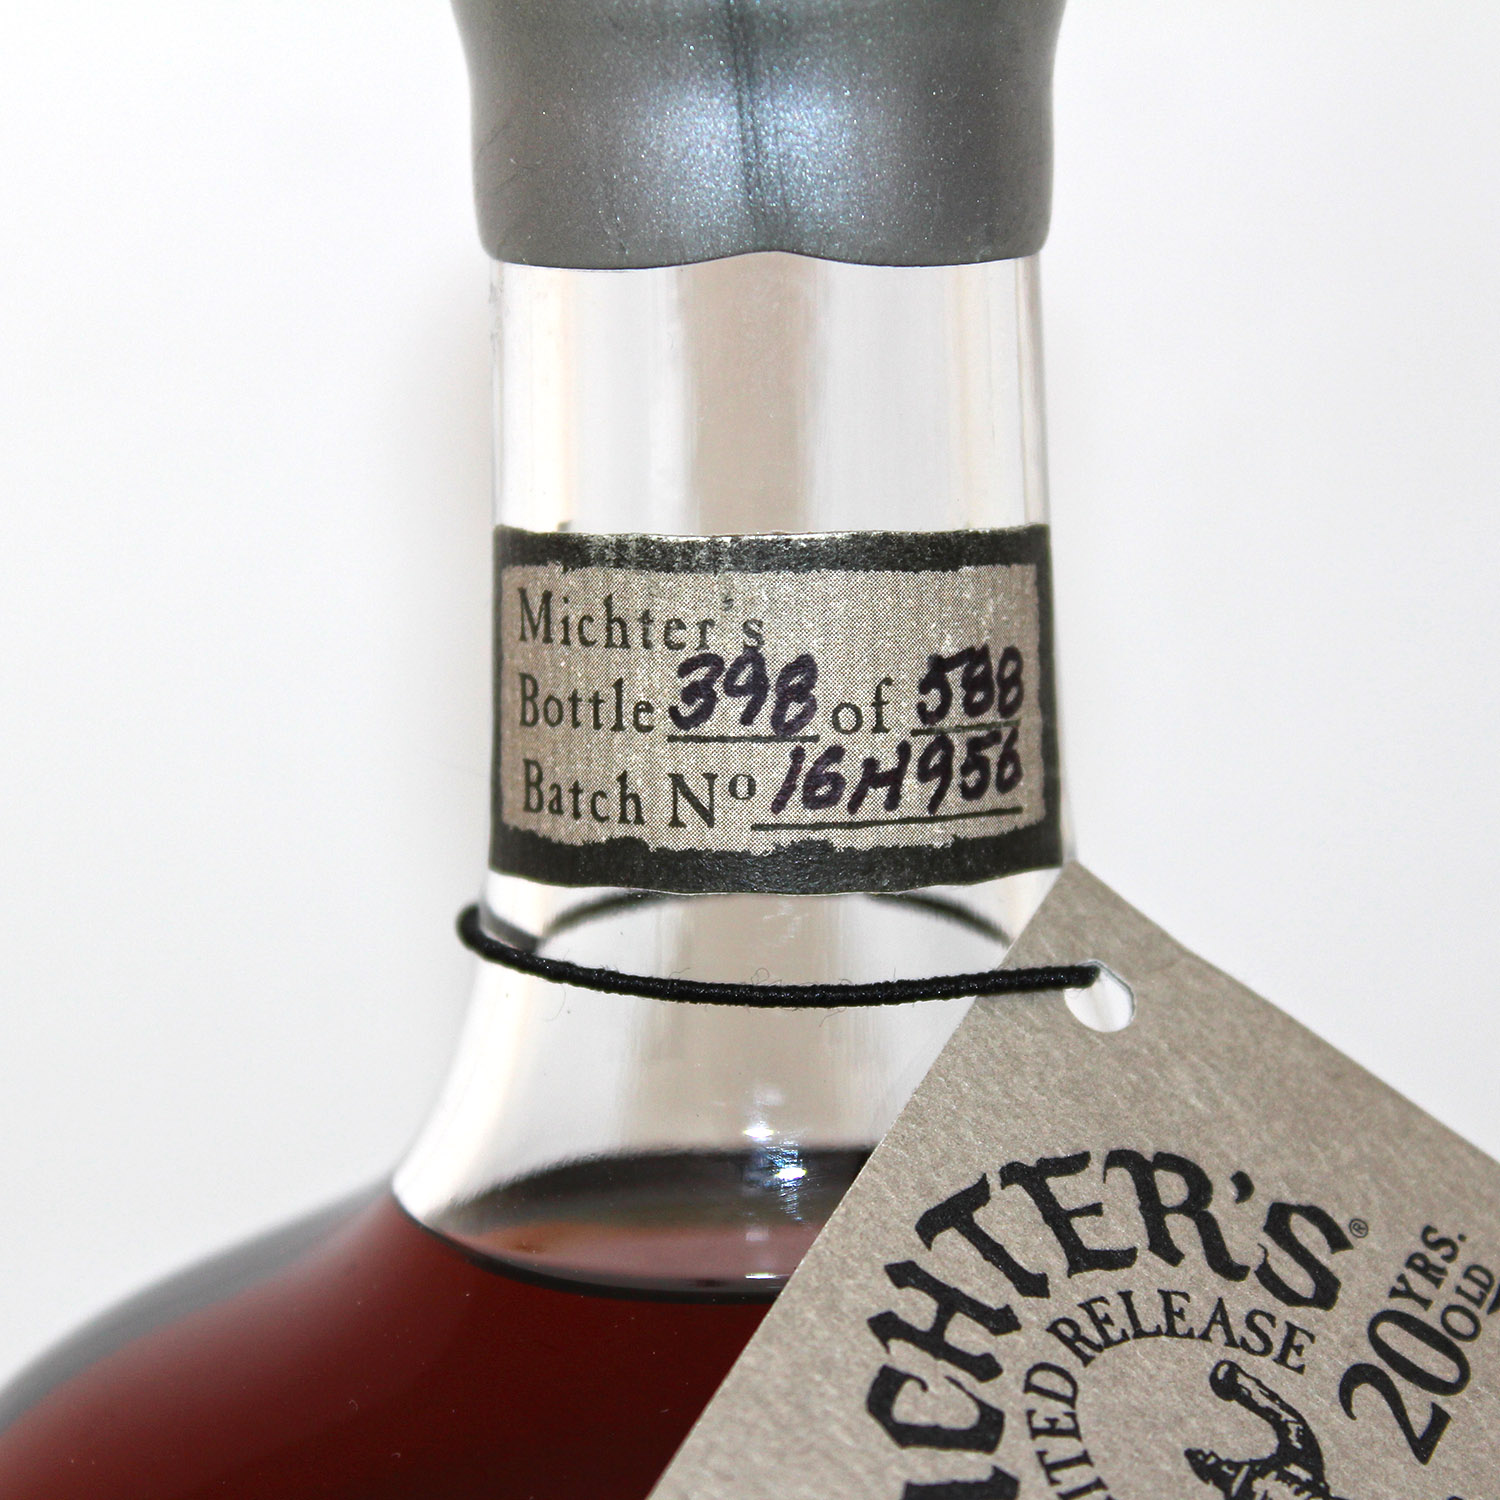 Michters 20 Year old Limited Release Bourbon Whiskey Batch